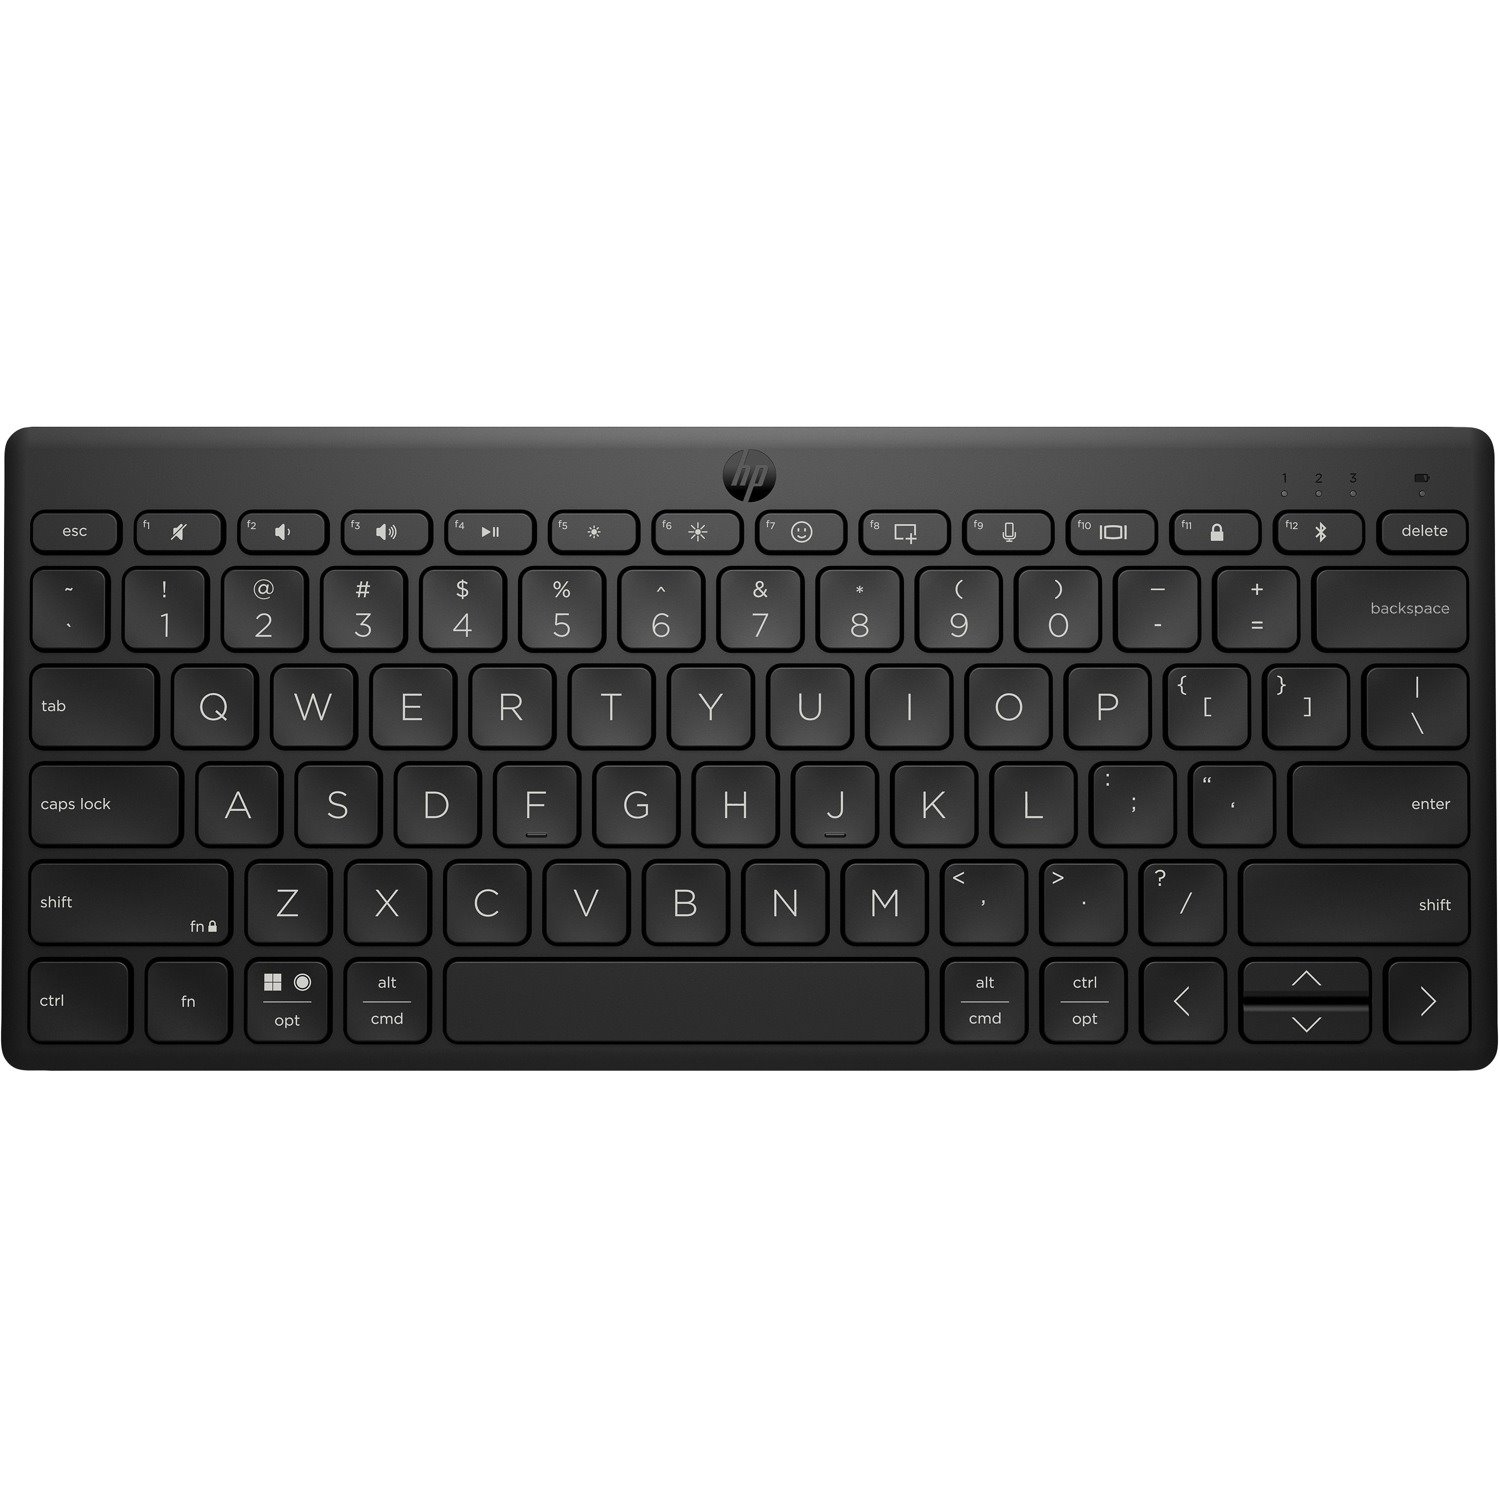 HP Compact 355 Rugged Keyboard - Wireless Connectivity - Black